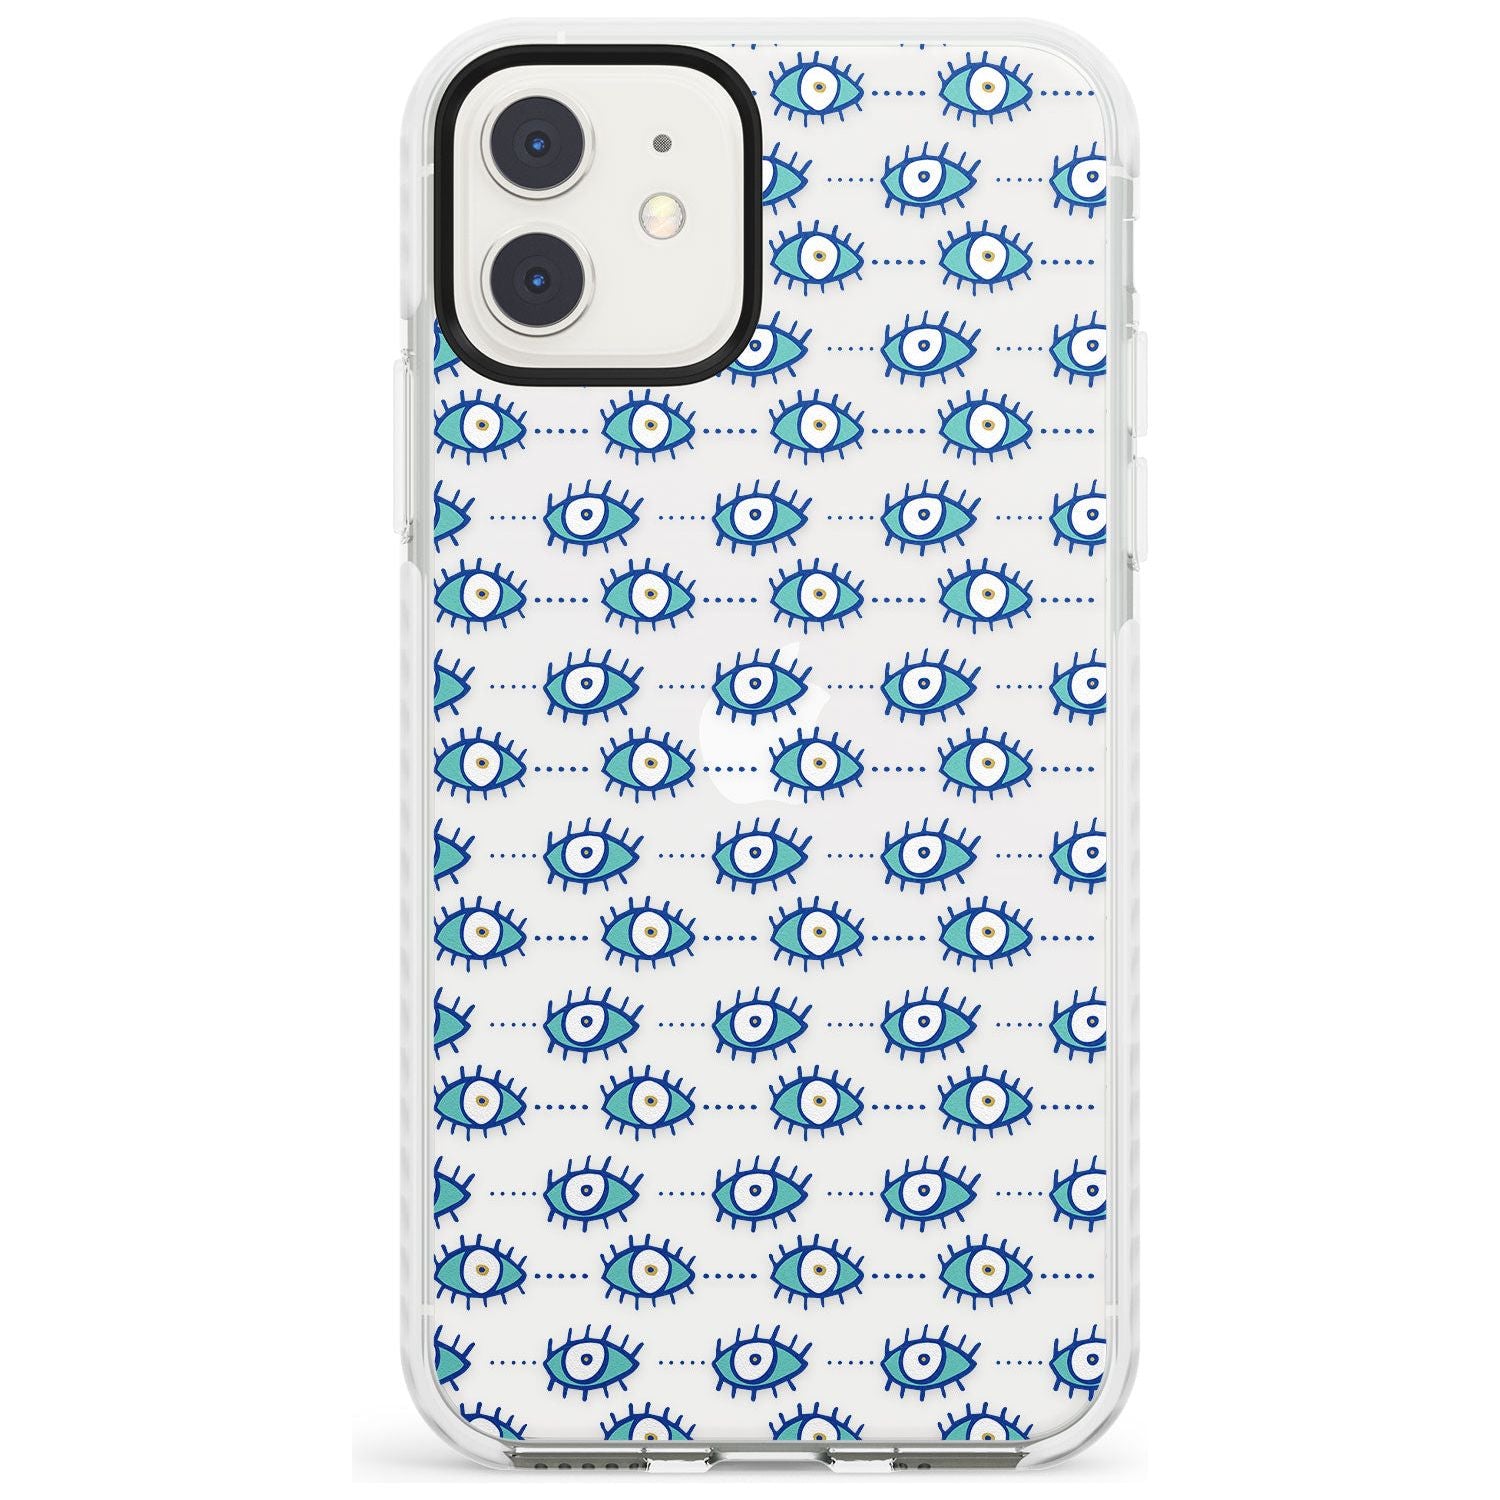 Crazy Eyes (Clear) Psychedelic Eyes Pattern Impact Phone Case for iPhone 11